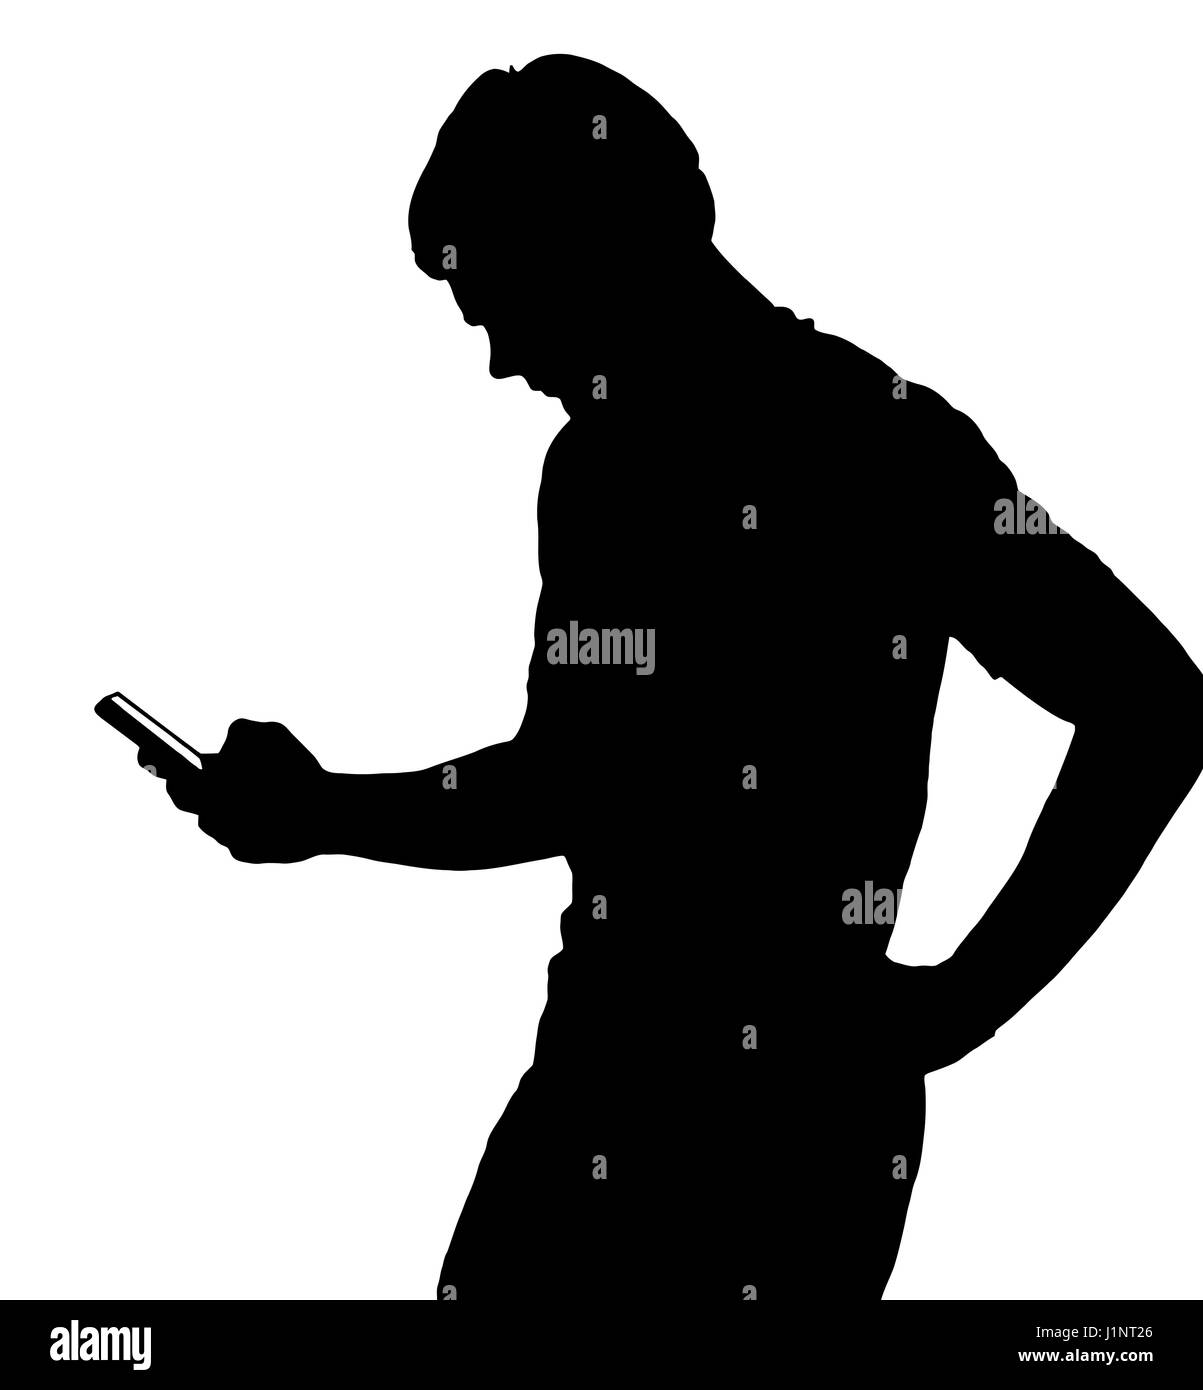 Download Side profile portrait silhouette of a teenage boy texting ...